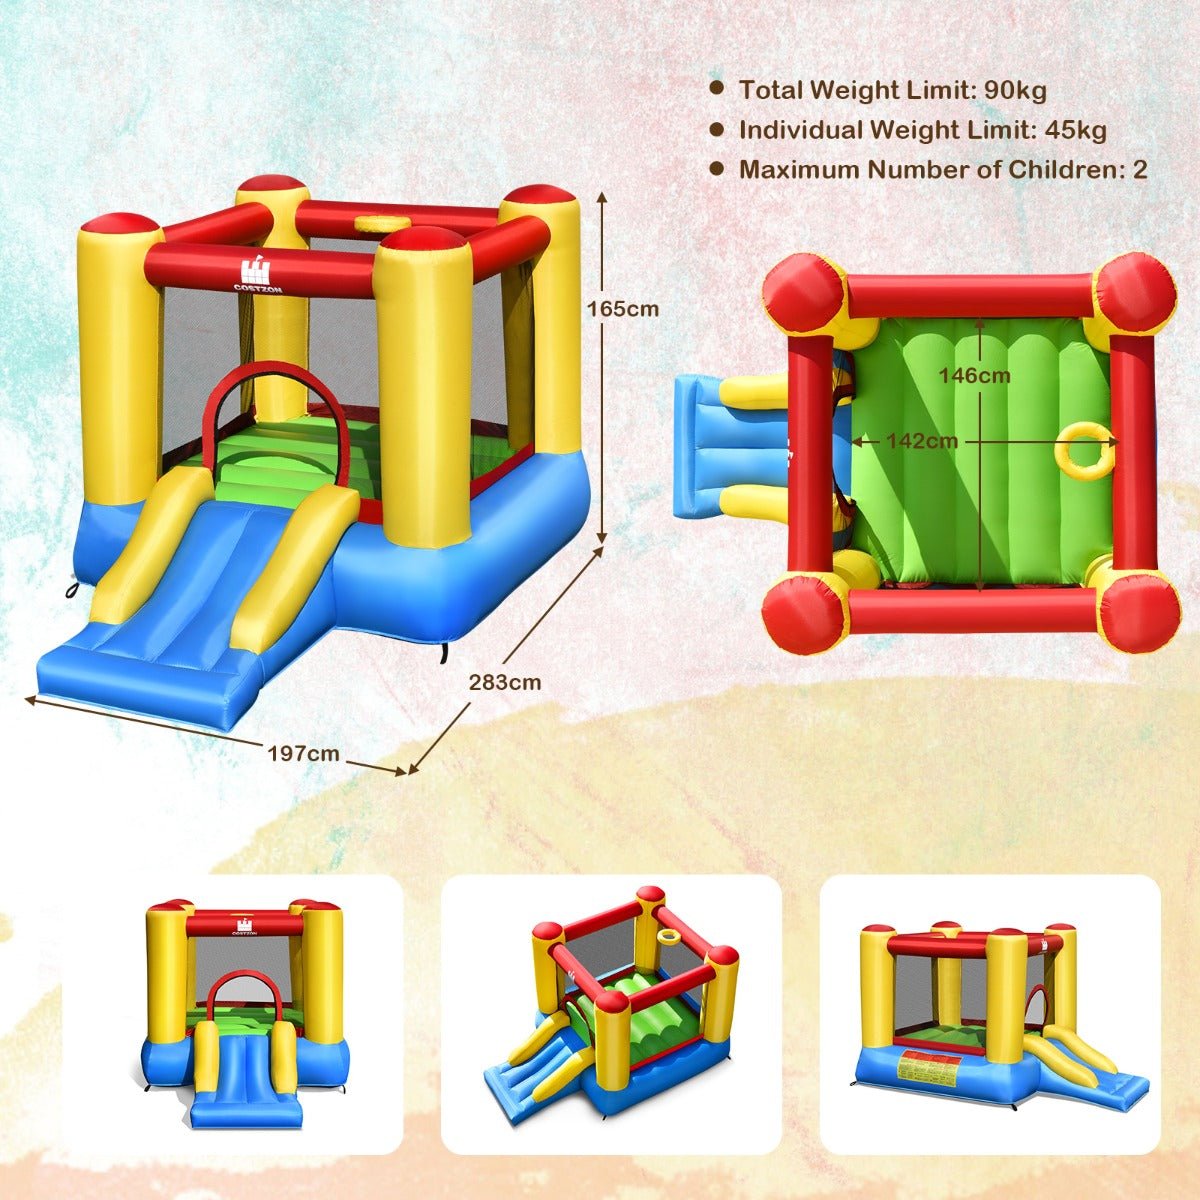 Playtime Excitement: Inflatable Bounce House Slide for Energetic Kids